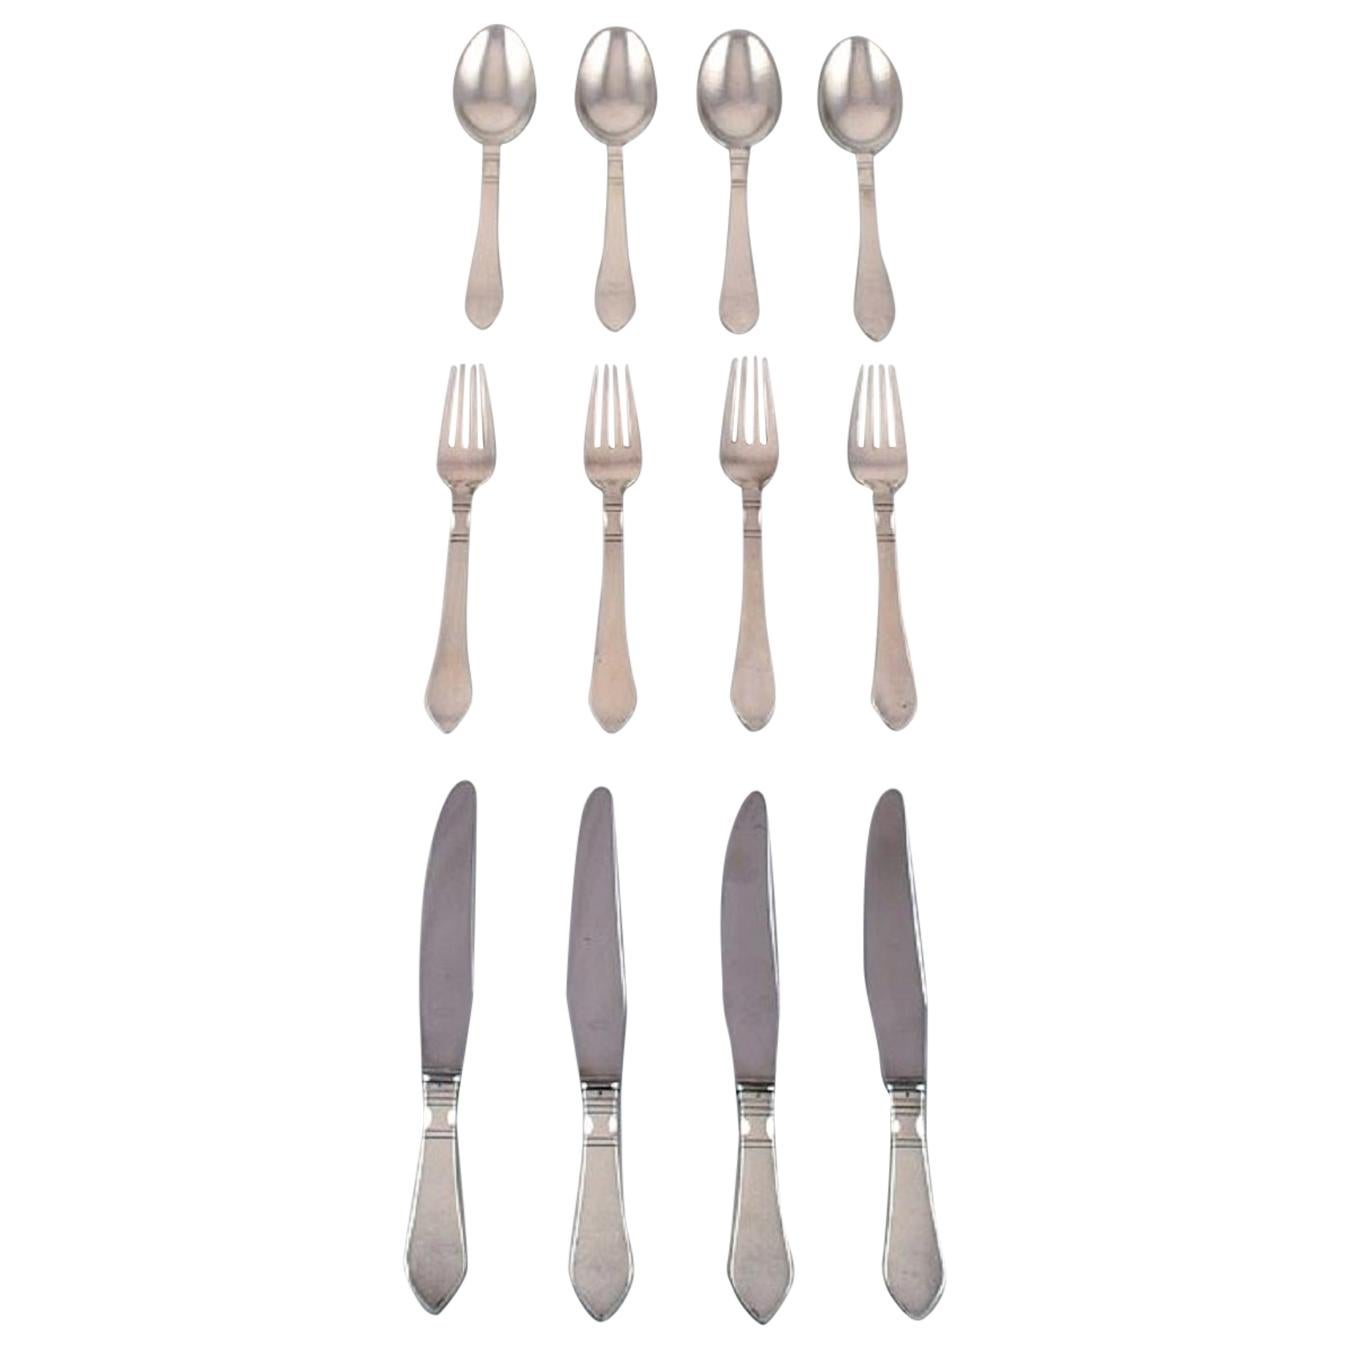 Georg Jensen "Continental" Silver Cutlery, Dinner Service for Four People